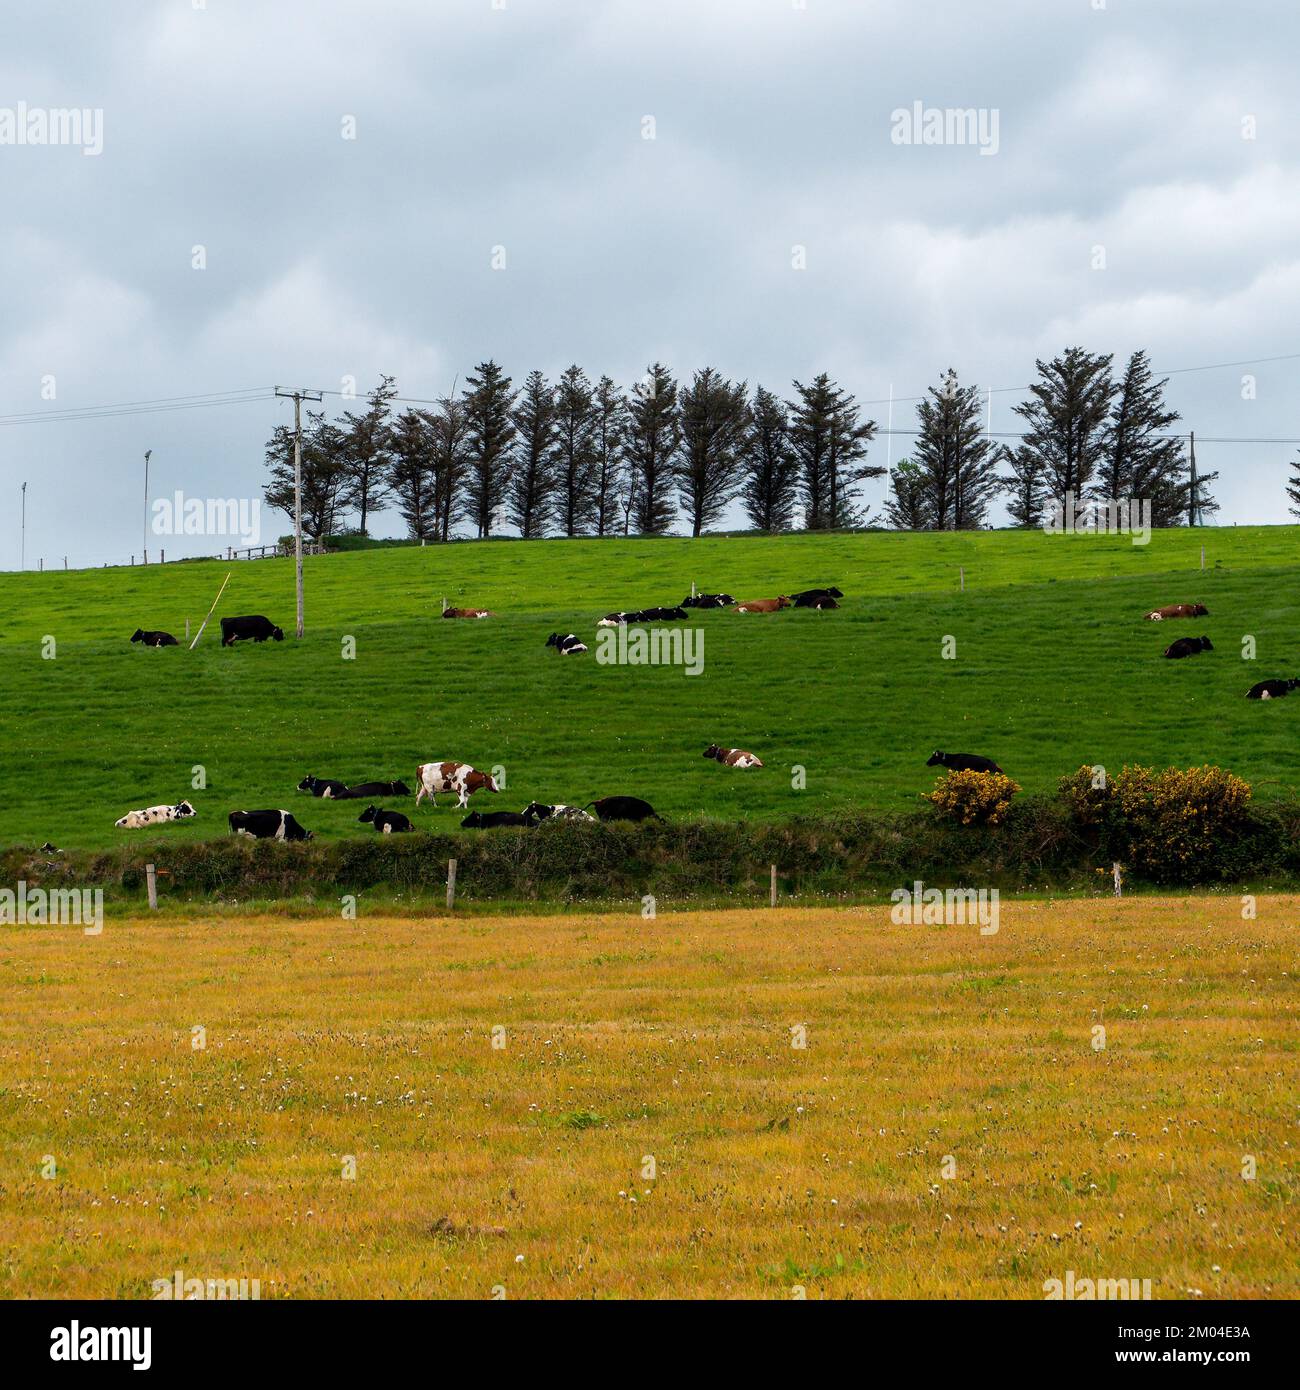 Village fields and pastures. Cows in a meadow. Agrarian landscape. Irish farmland. Green field with trees Stock Photo